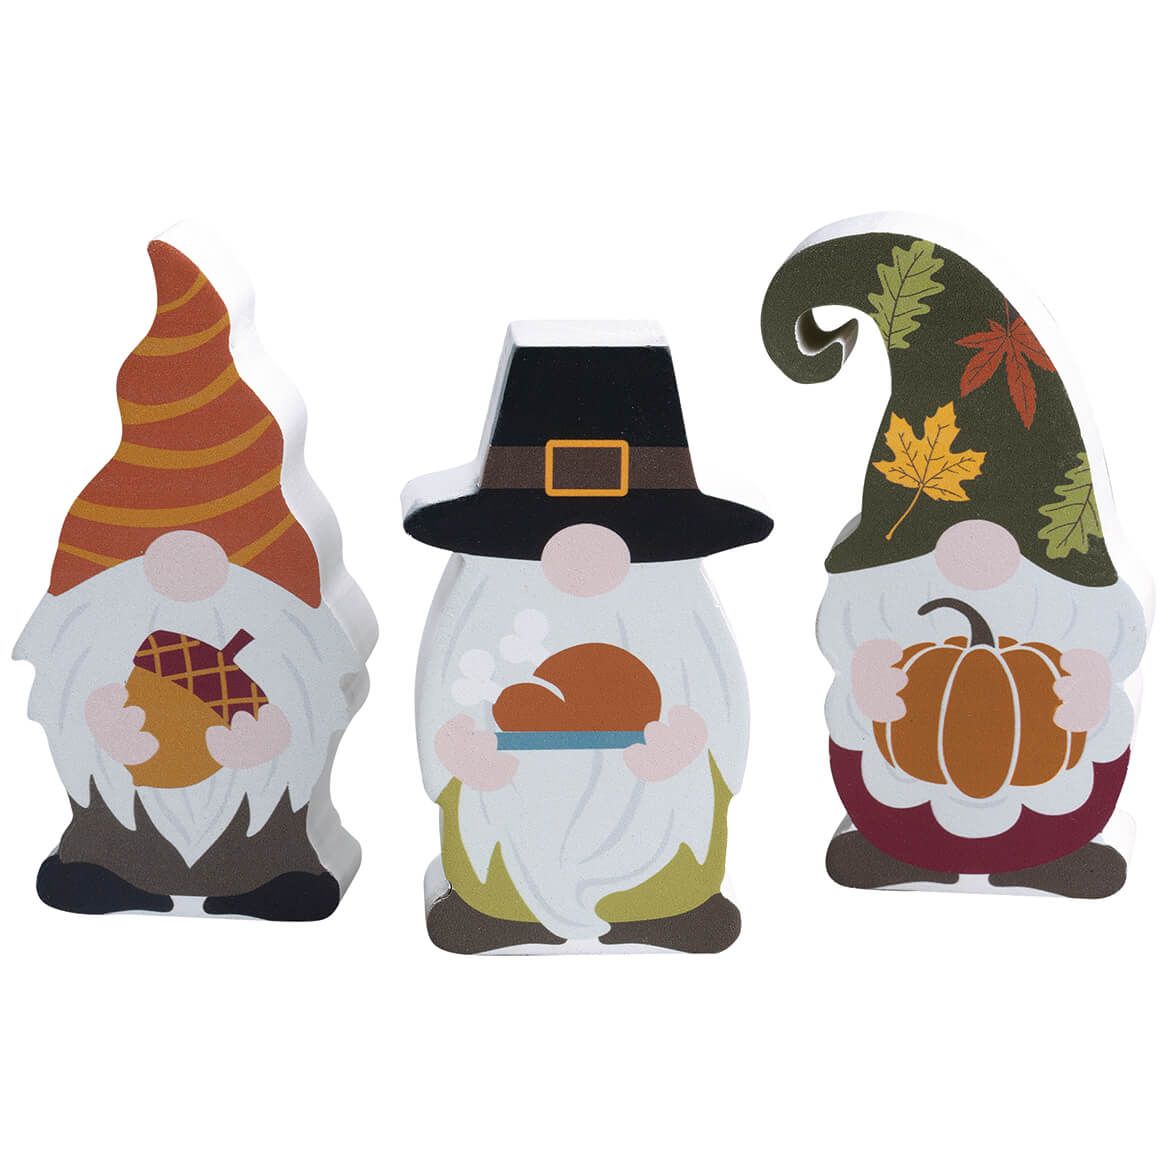 Fall Gnome Table Sitters by Holiday Peak™, Set of 3 + '-' + 373908